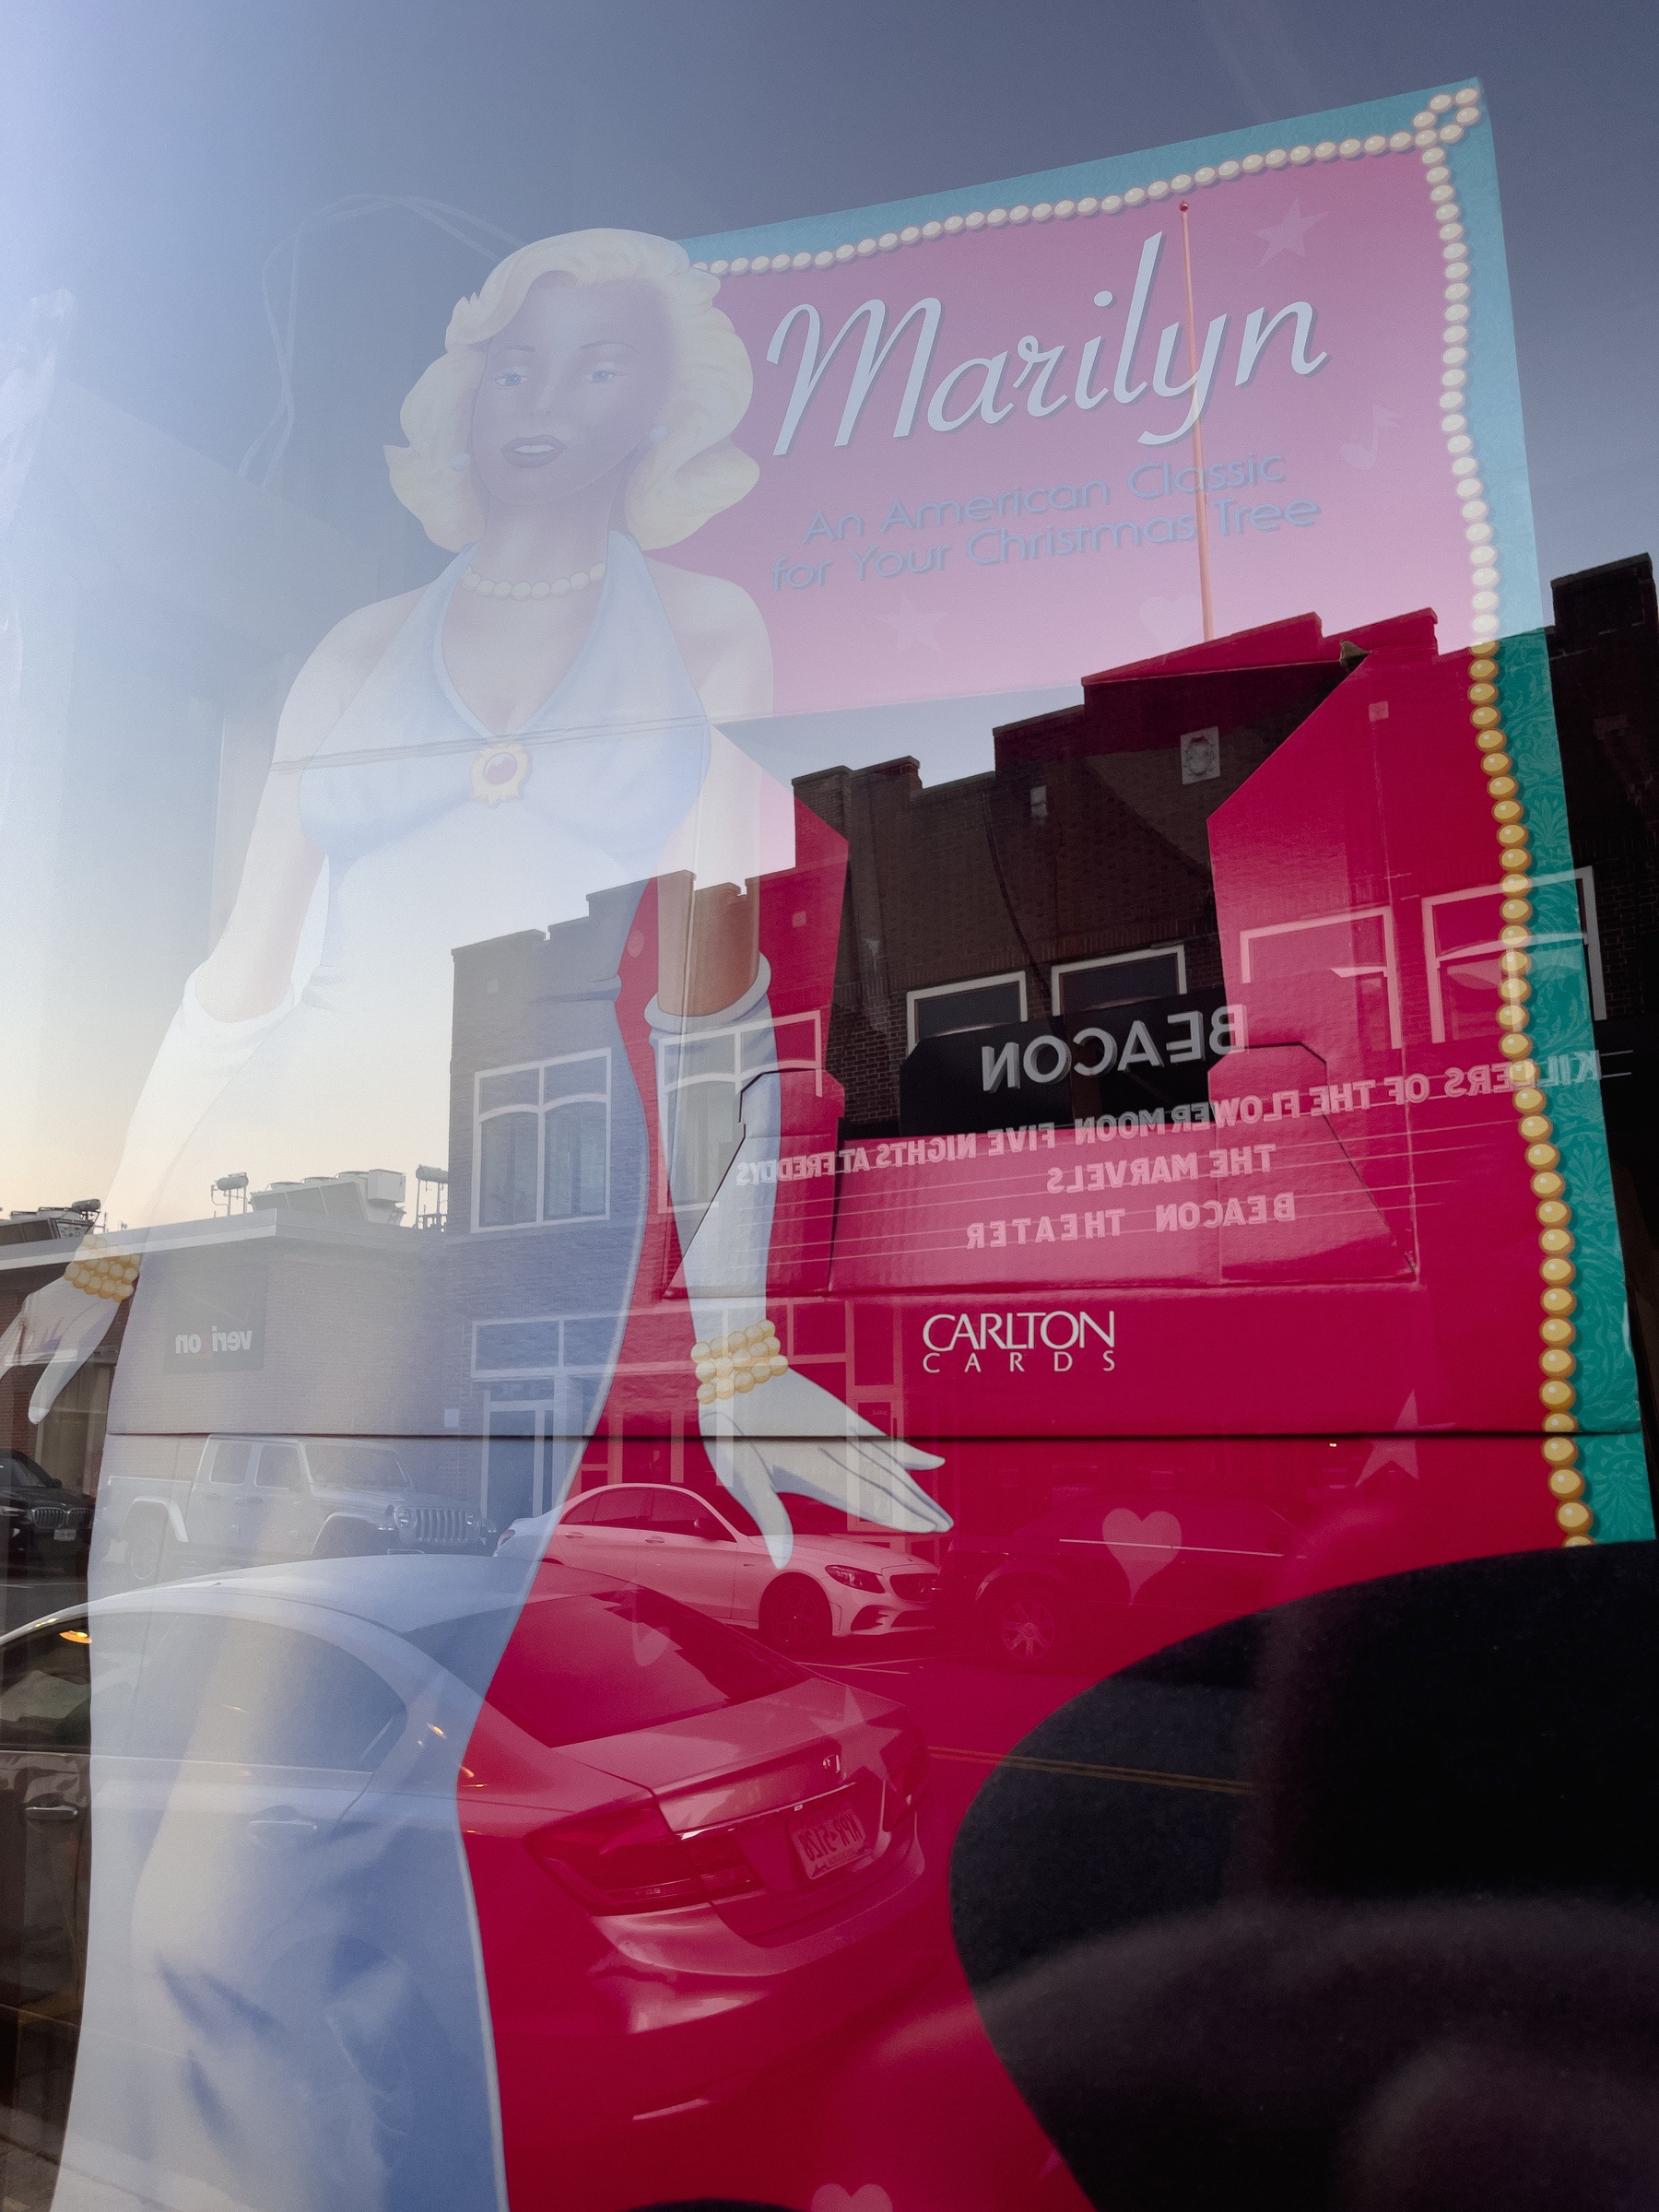 Vintage Marilyn movie poster in shop window, reflection of movie theater across the street overlaid.